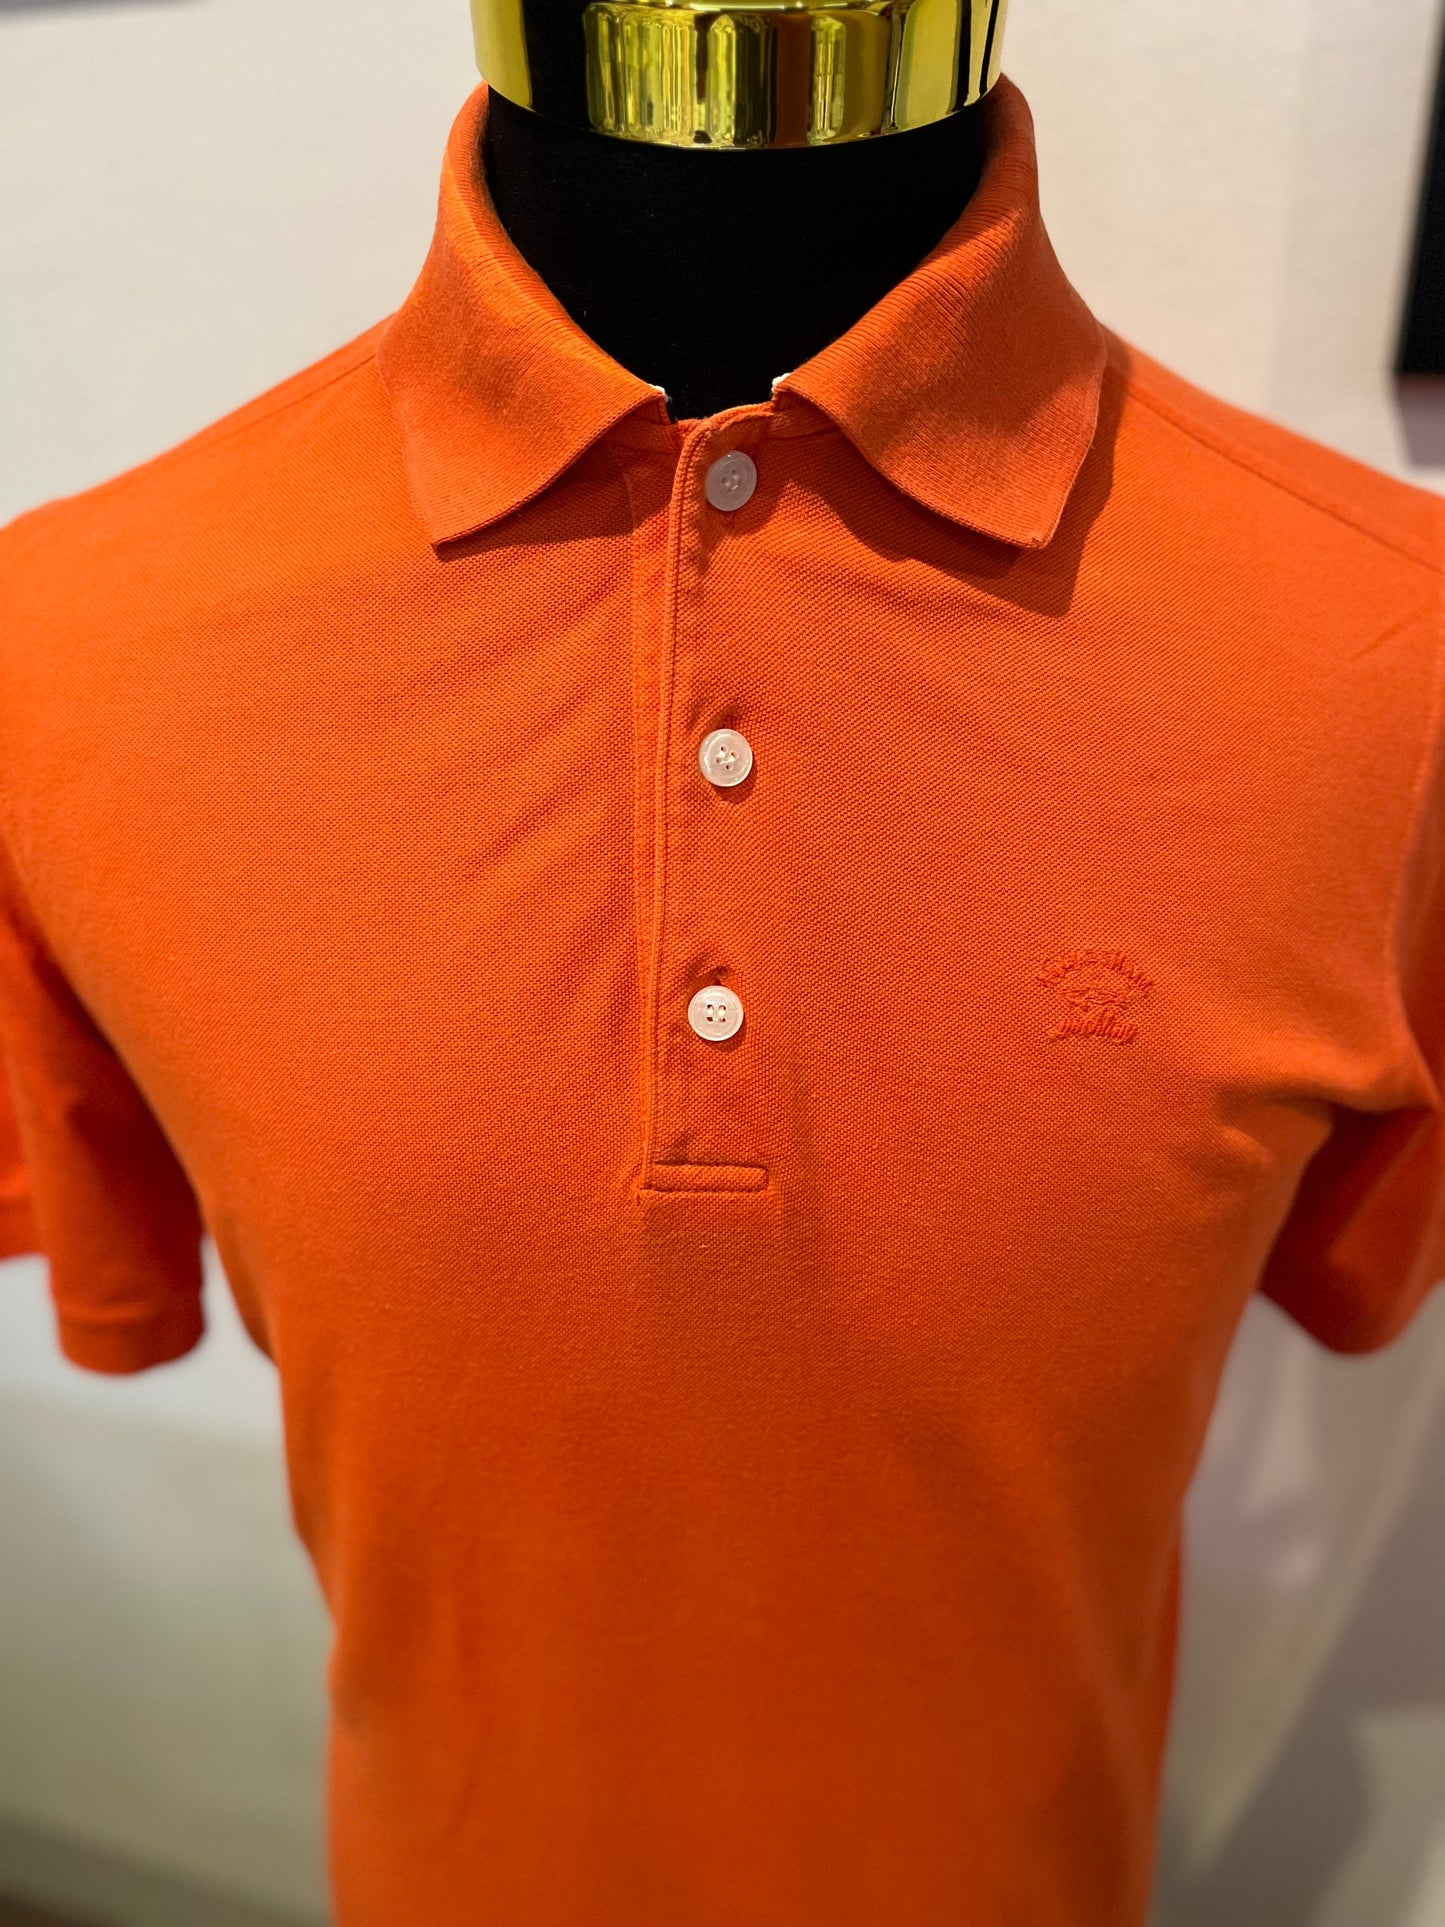 Paul & Shark 100% Cotton Orange Polo Shirt Made in Italy Size XL fits Large to XL Light Pique